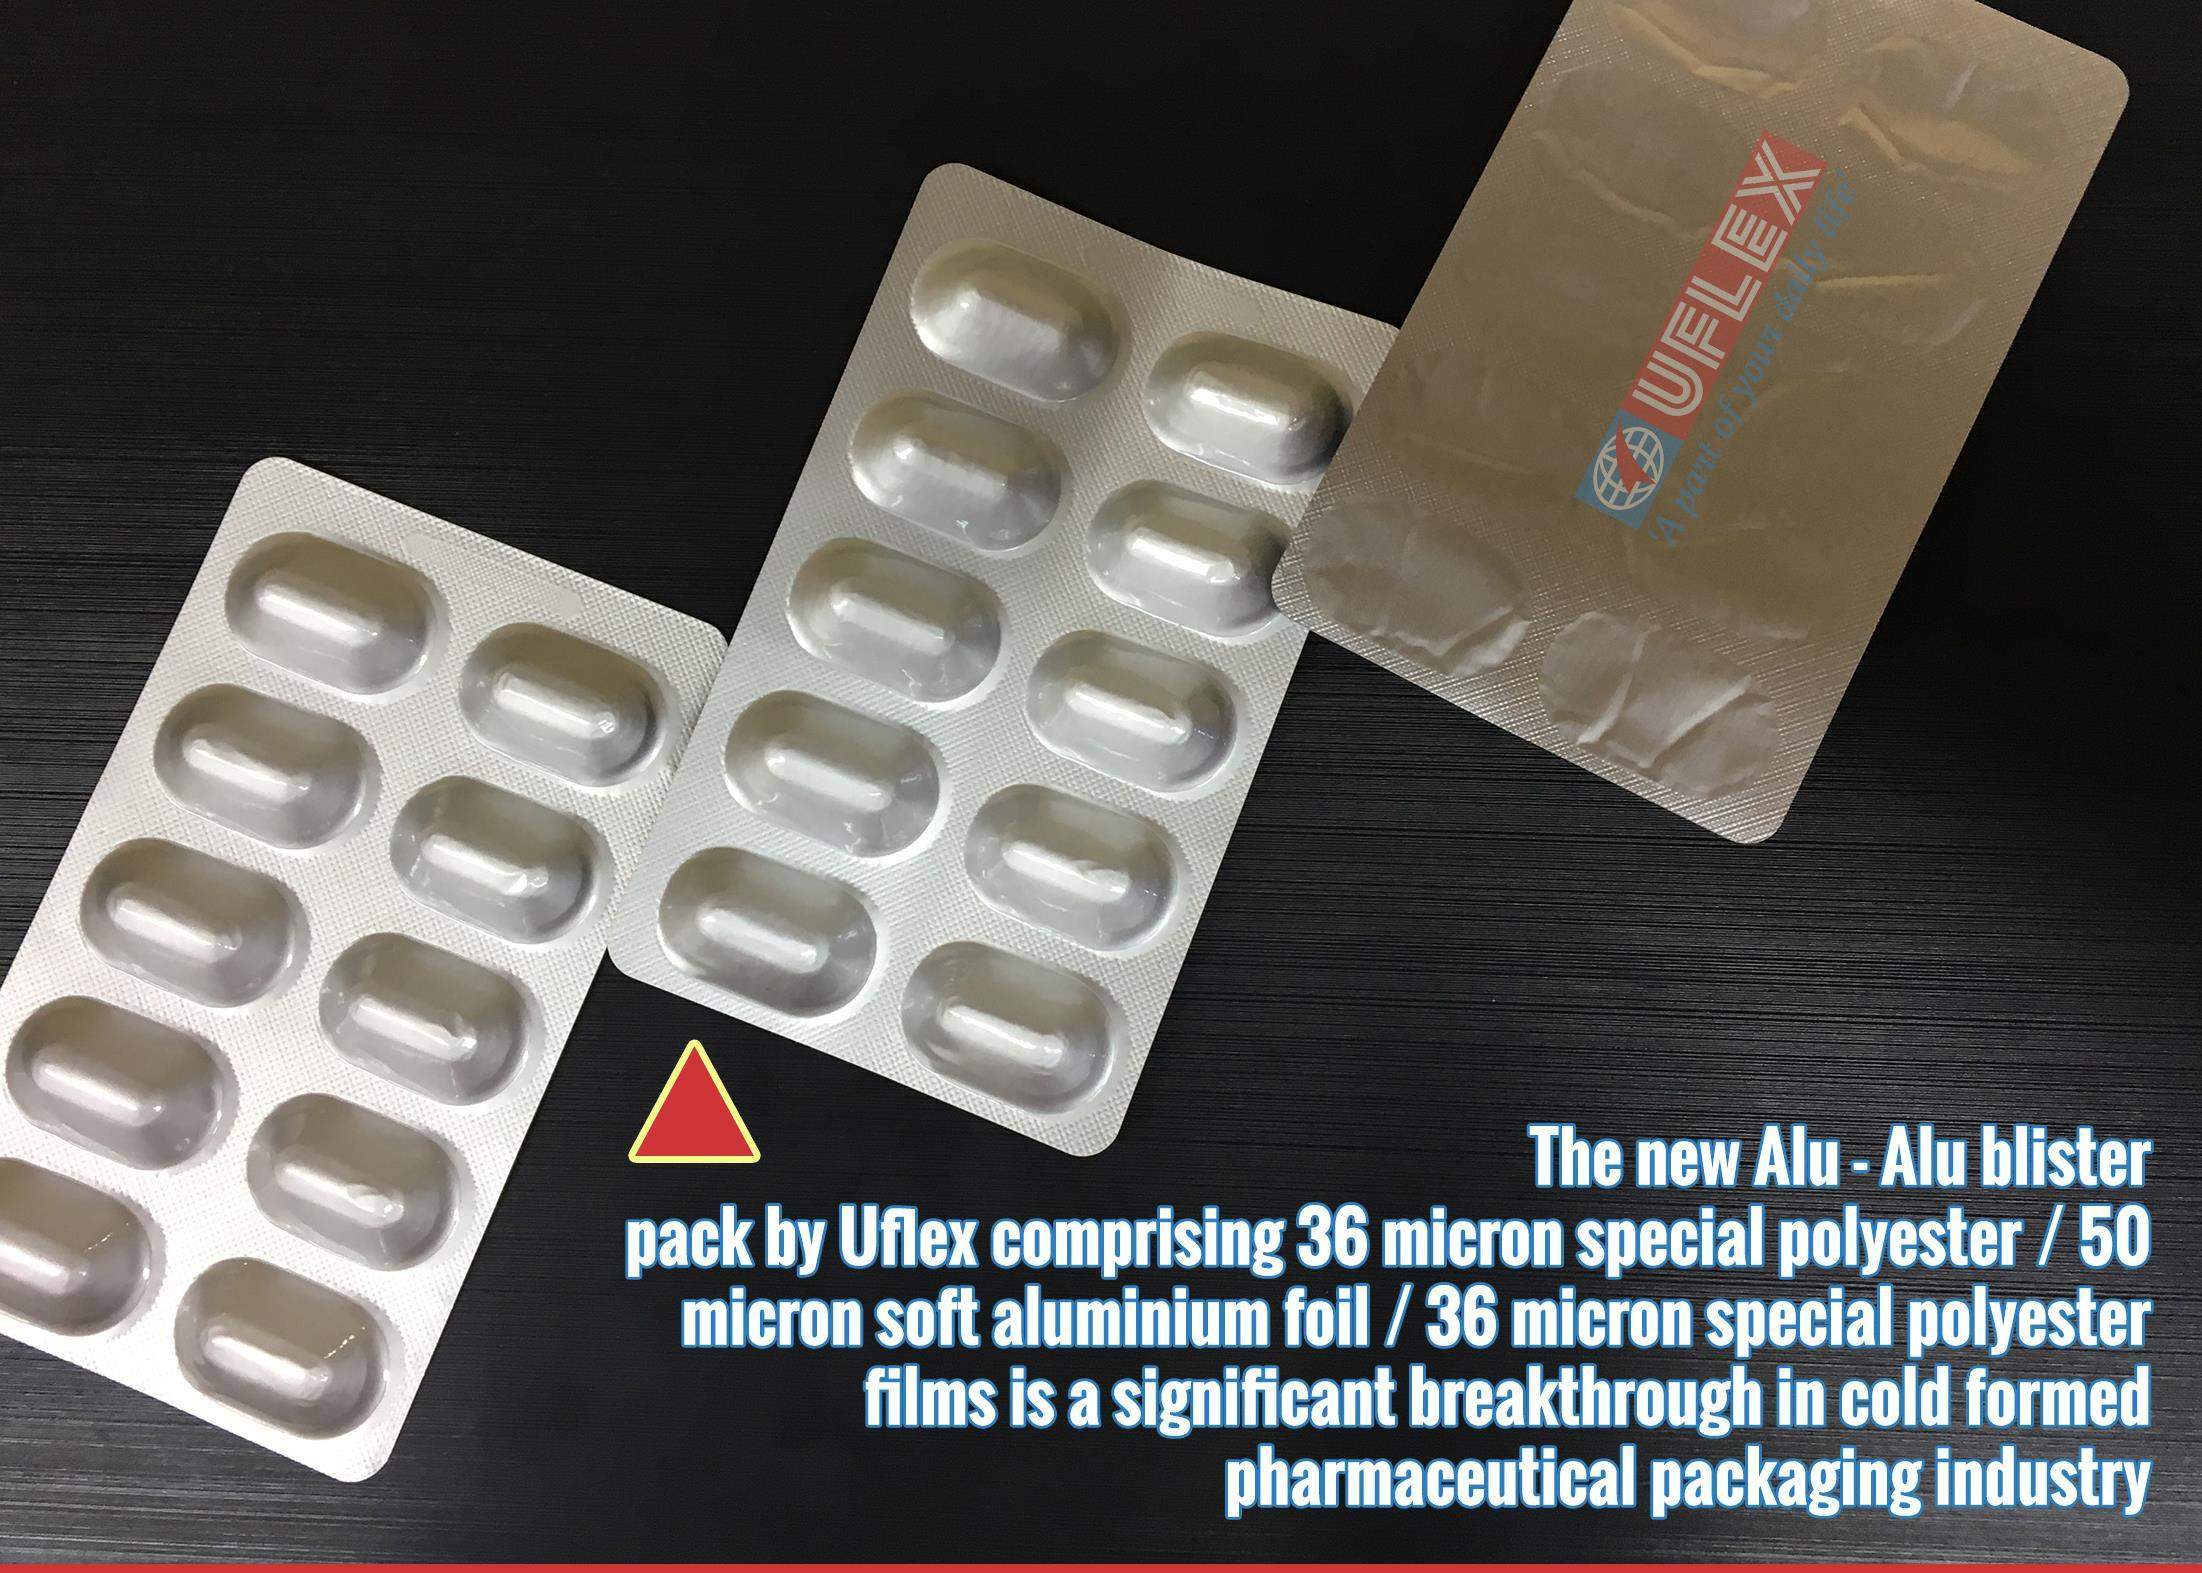 Uflex presents a game changer in pharma packaging